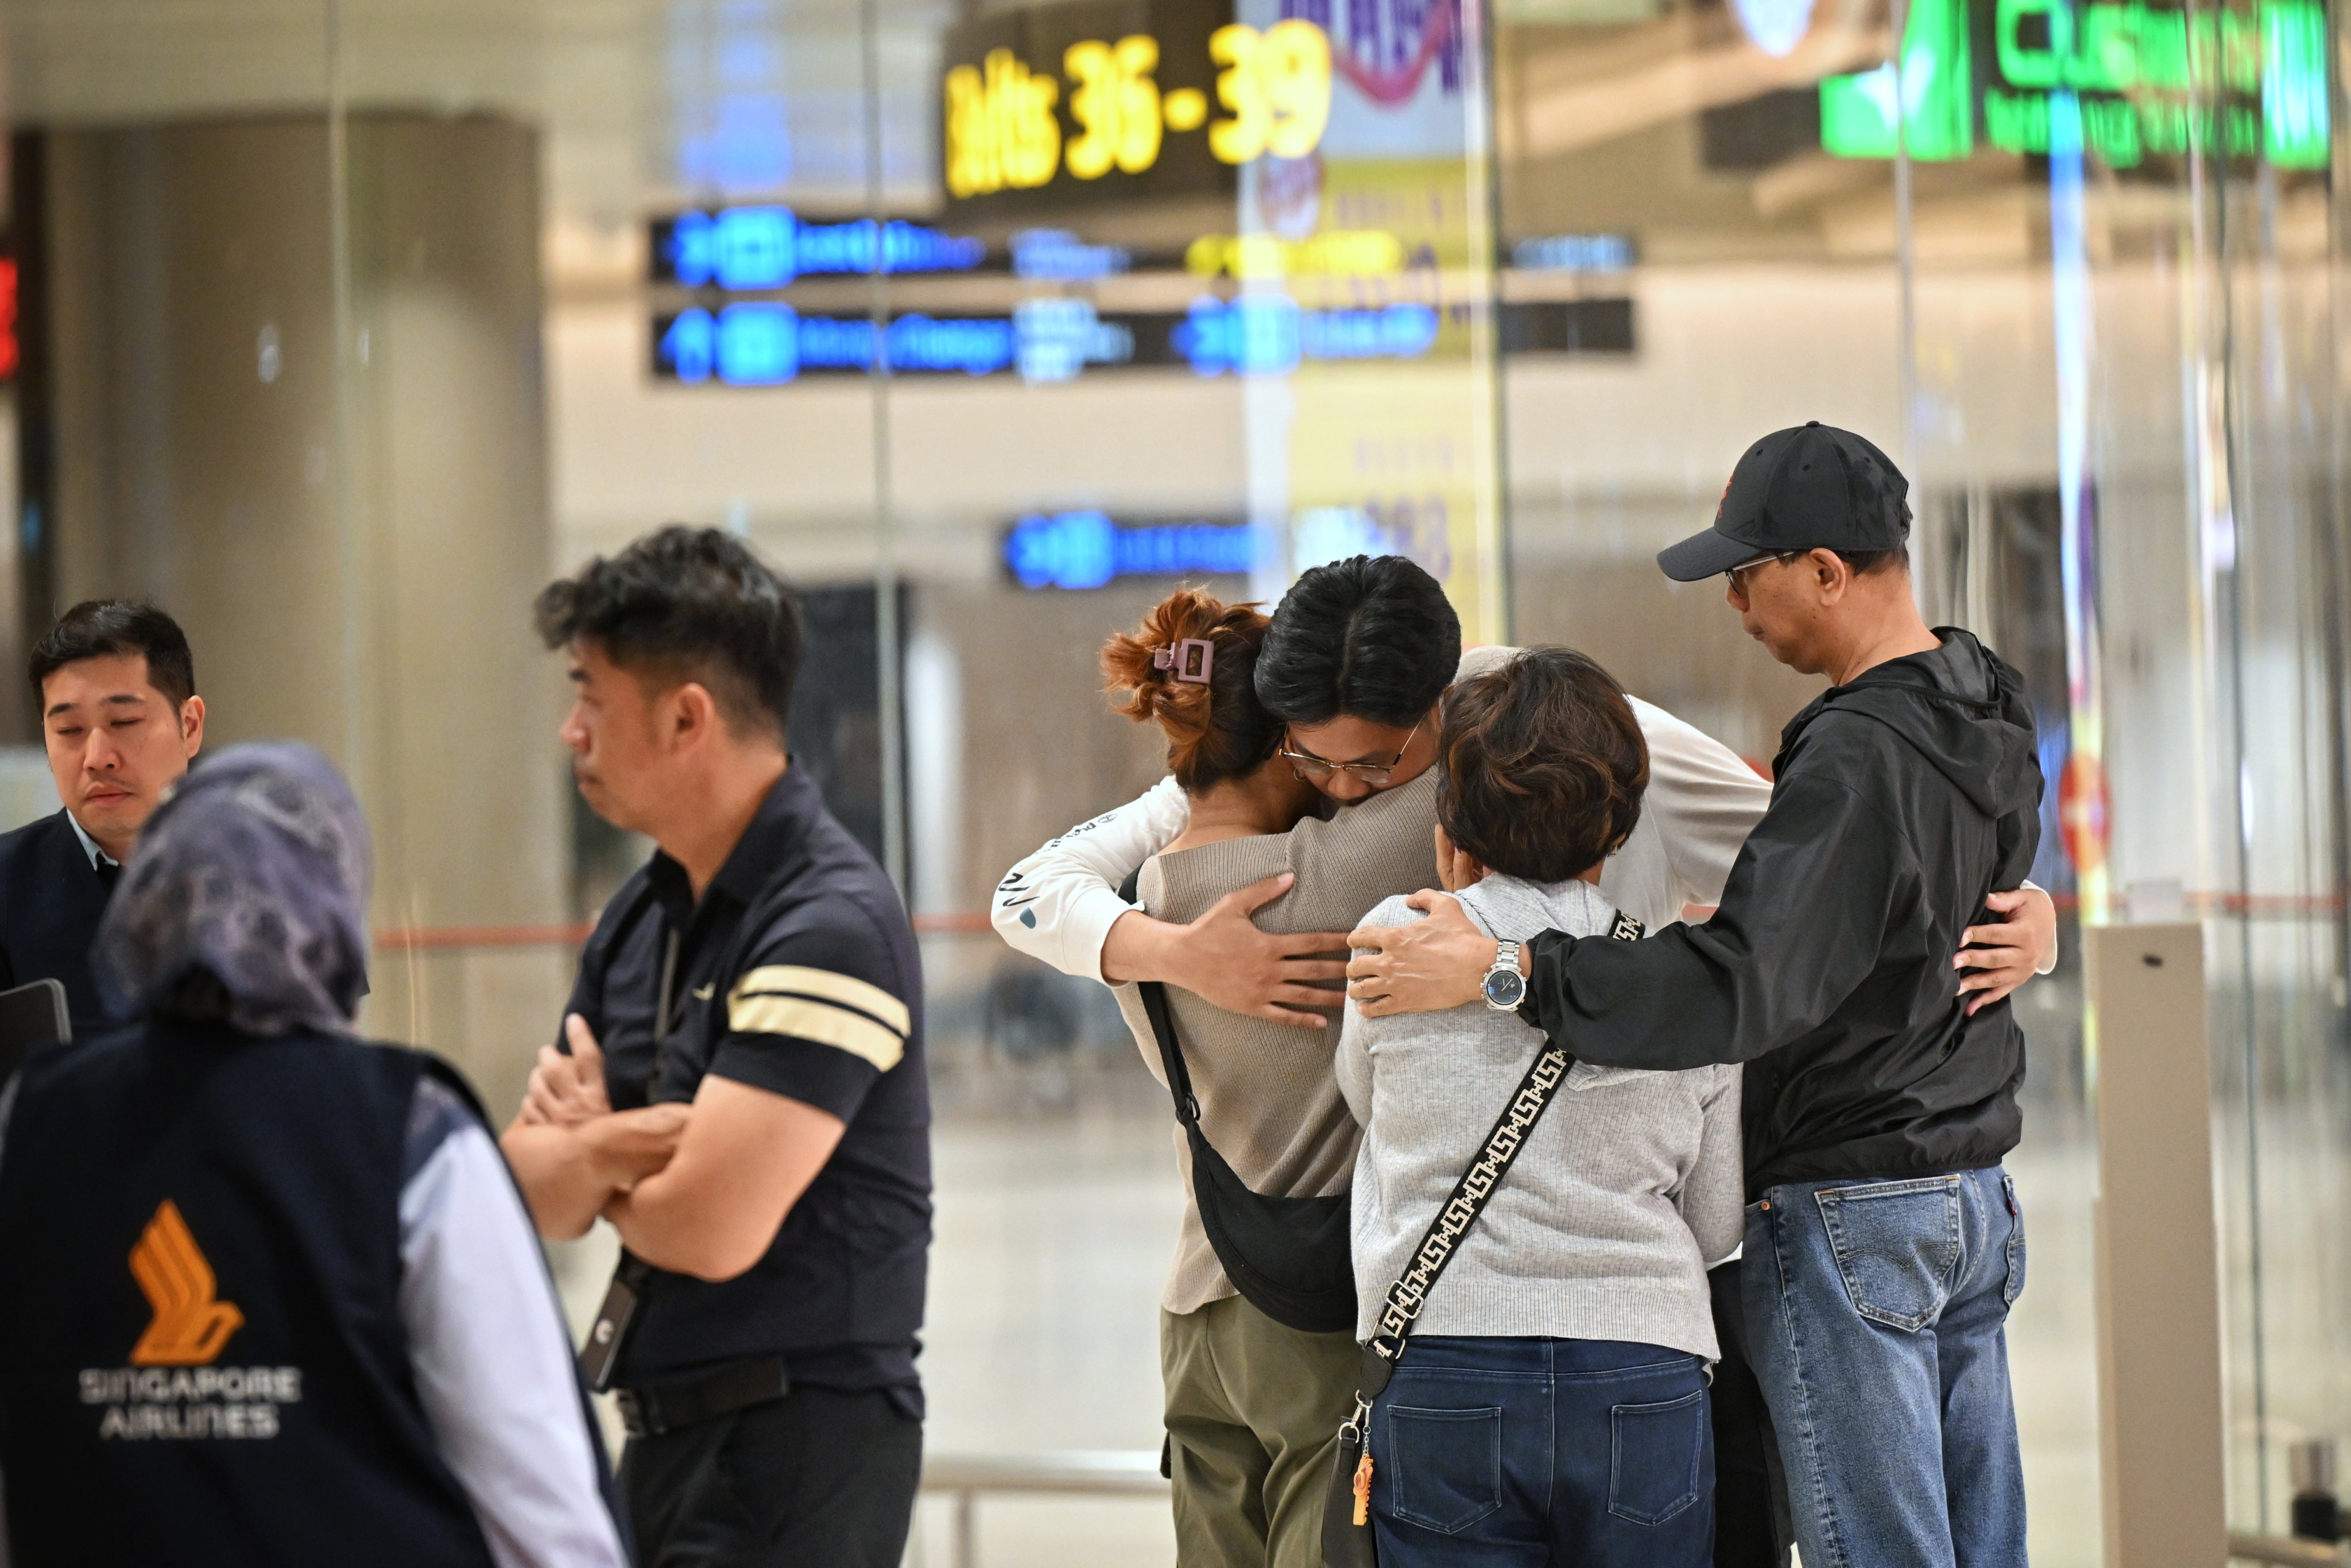 People who travelled on the Singapore Airlines flight SQ321, which made an emergency landing in Bangkok after encountering severe turbulence, greet family upon arrival at Changi Airport in Singapore on May 22. Photo: EPA-EFE